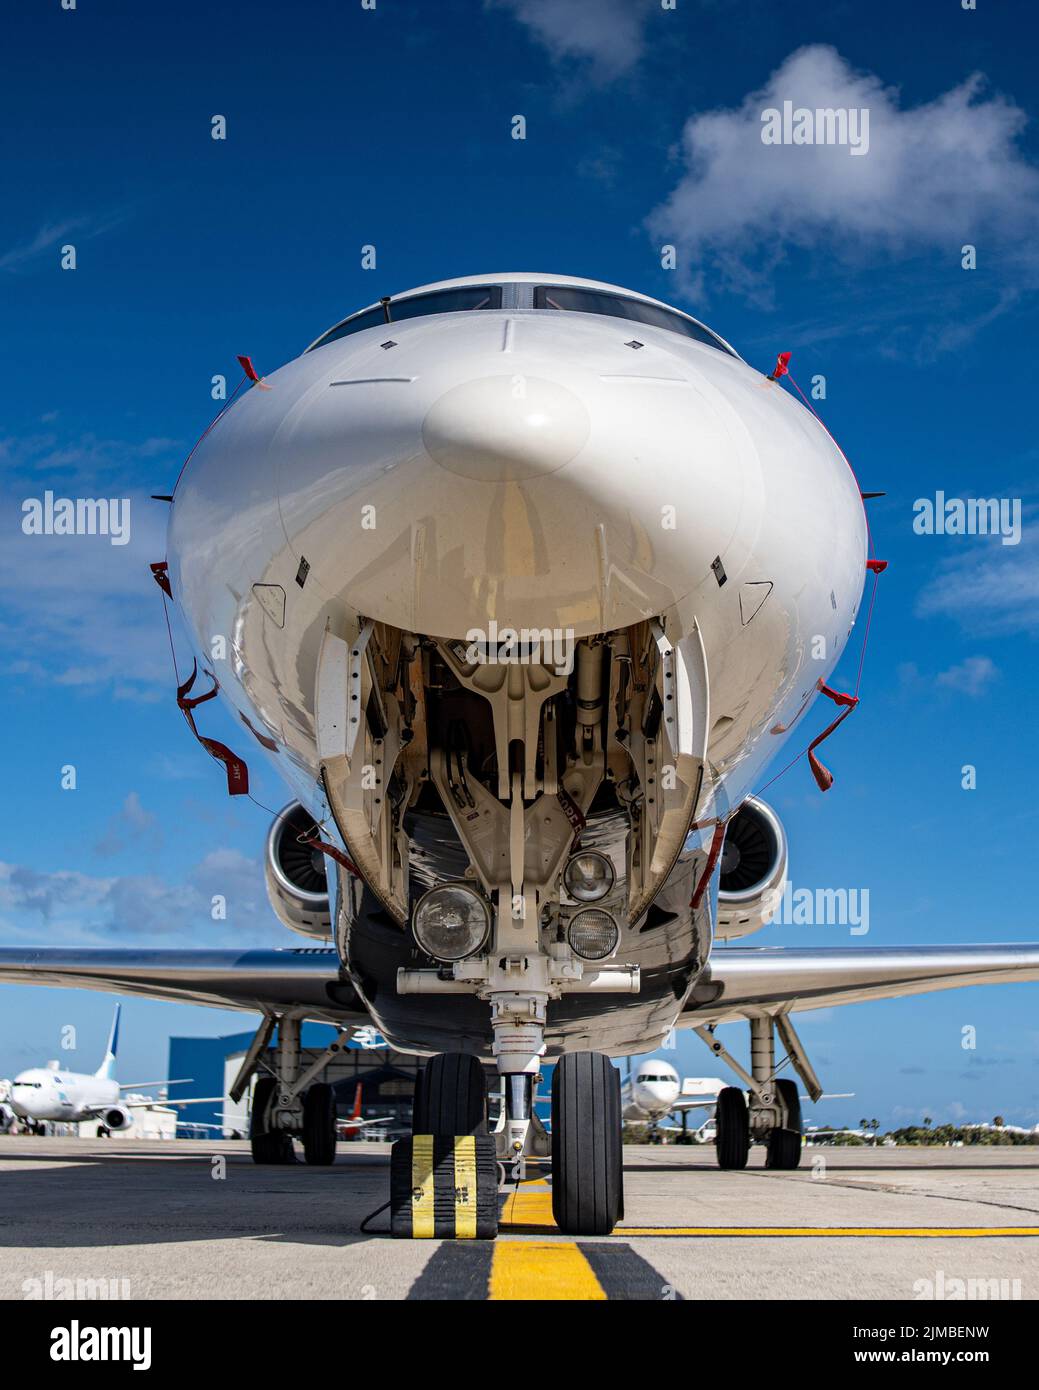 A low angle close-up view of landing gear under a big jet plane parked at the airport apron Stock Photo